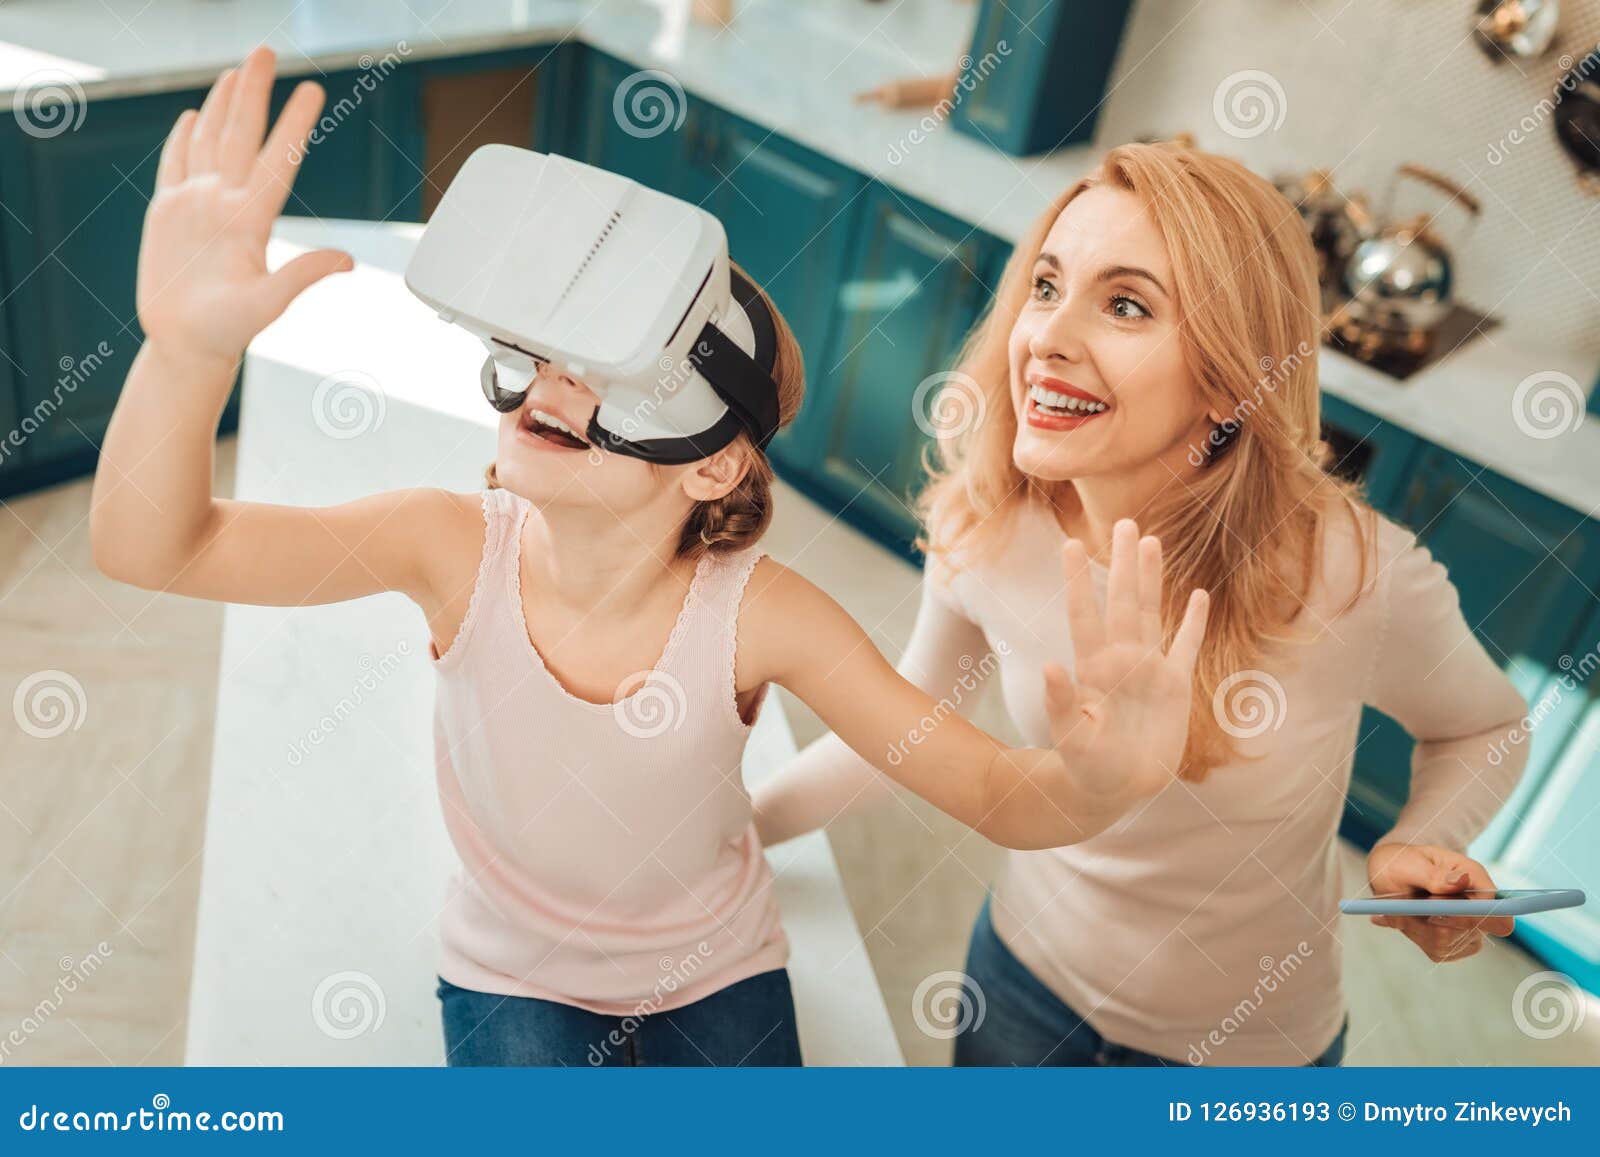 Low Angle Picture Mom and Testing VR Stock Image - Image of family, love: 126936193